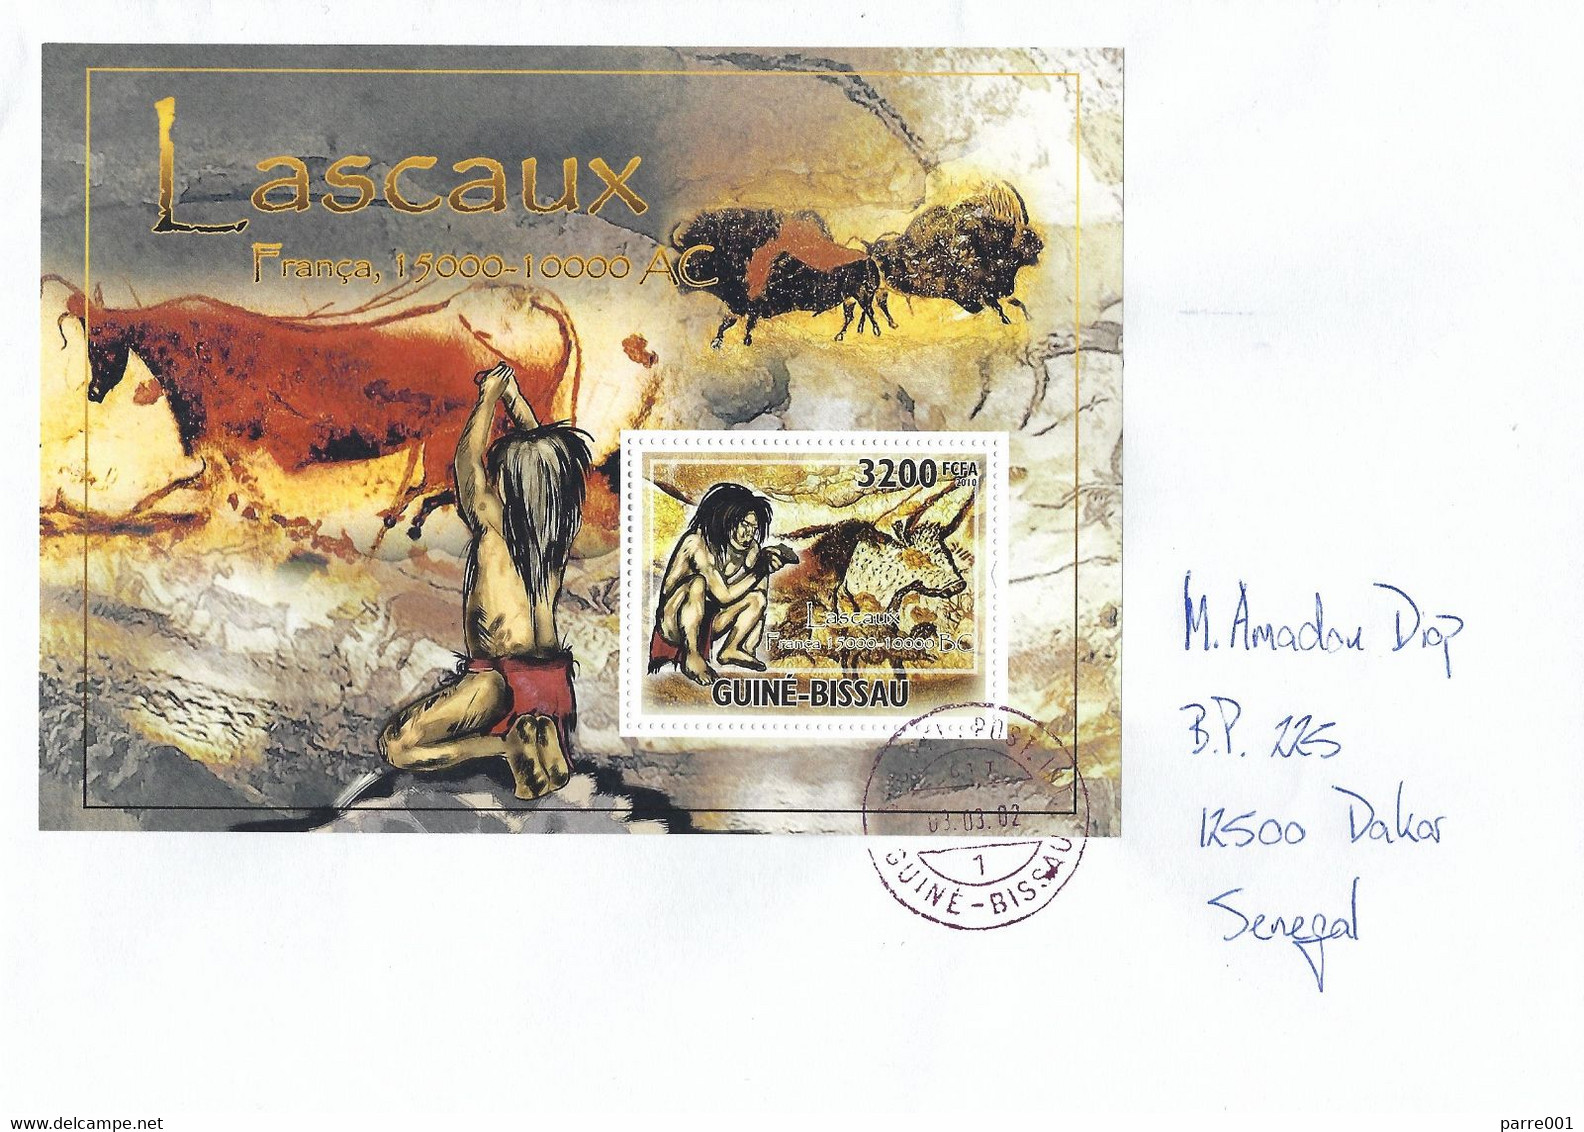 Guinea Bissau 2022 Prehistory Lascaux Cave Paintings Bison MS Cover - Prehistory